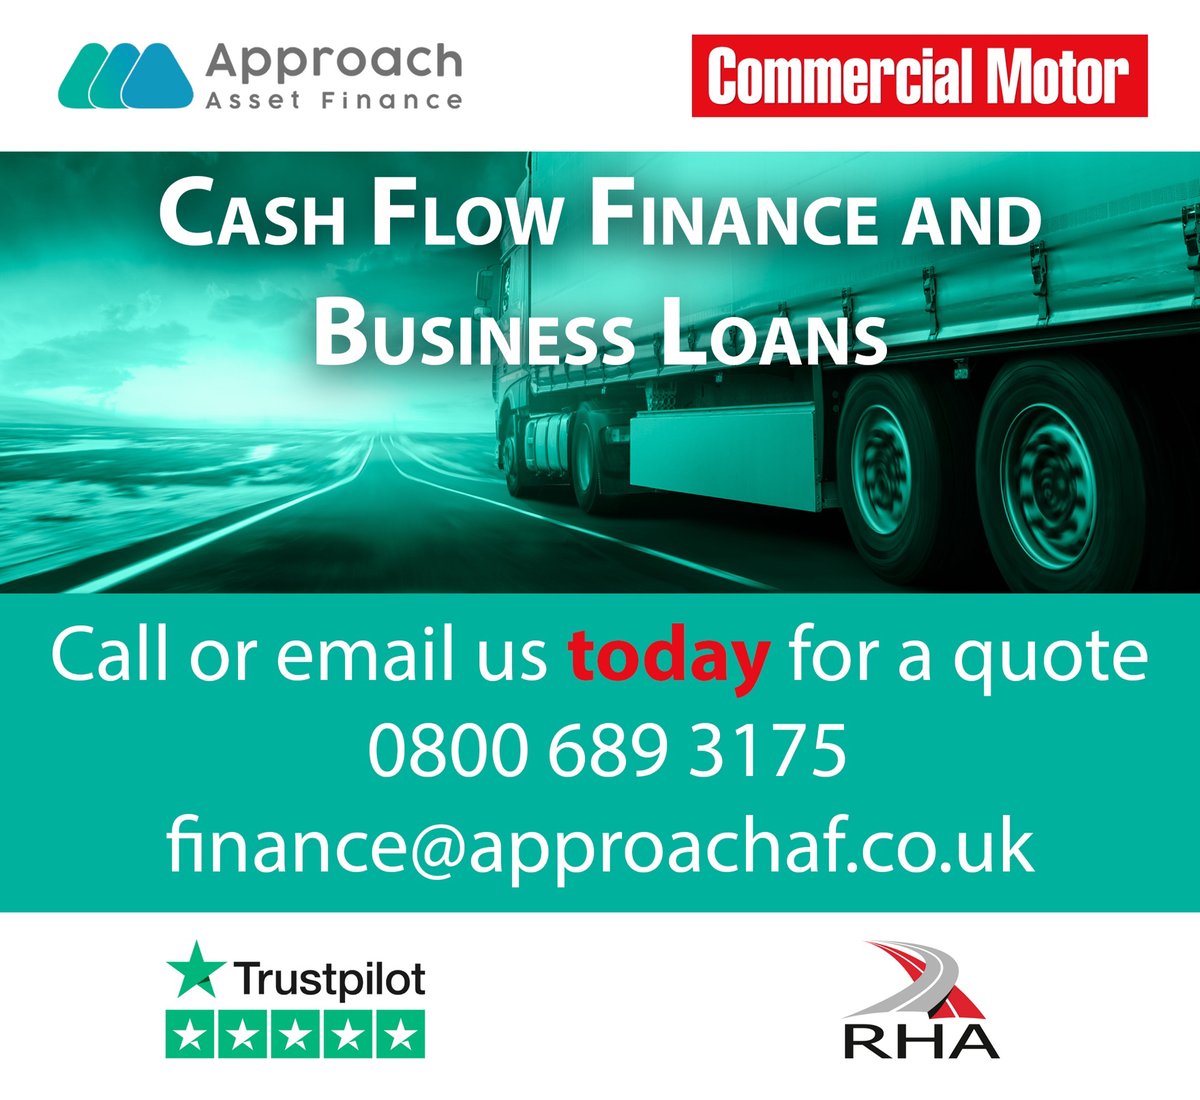 Need help with business cashflow❓ Speak to Approach Asset Finance. ✅Quick Decisions ✅Funds for any purpose ✅ Simple document process 📞 0800 689 3175 🌐 bit.ly/3JzwGNf 📧 finance@approachaf.co.uk #AD